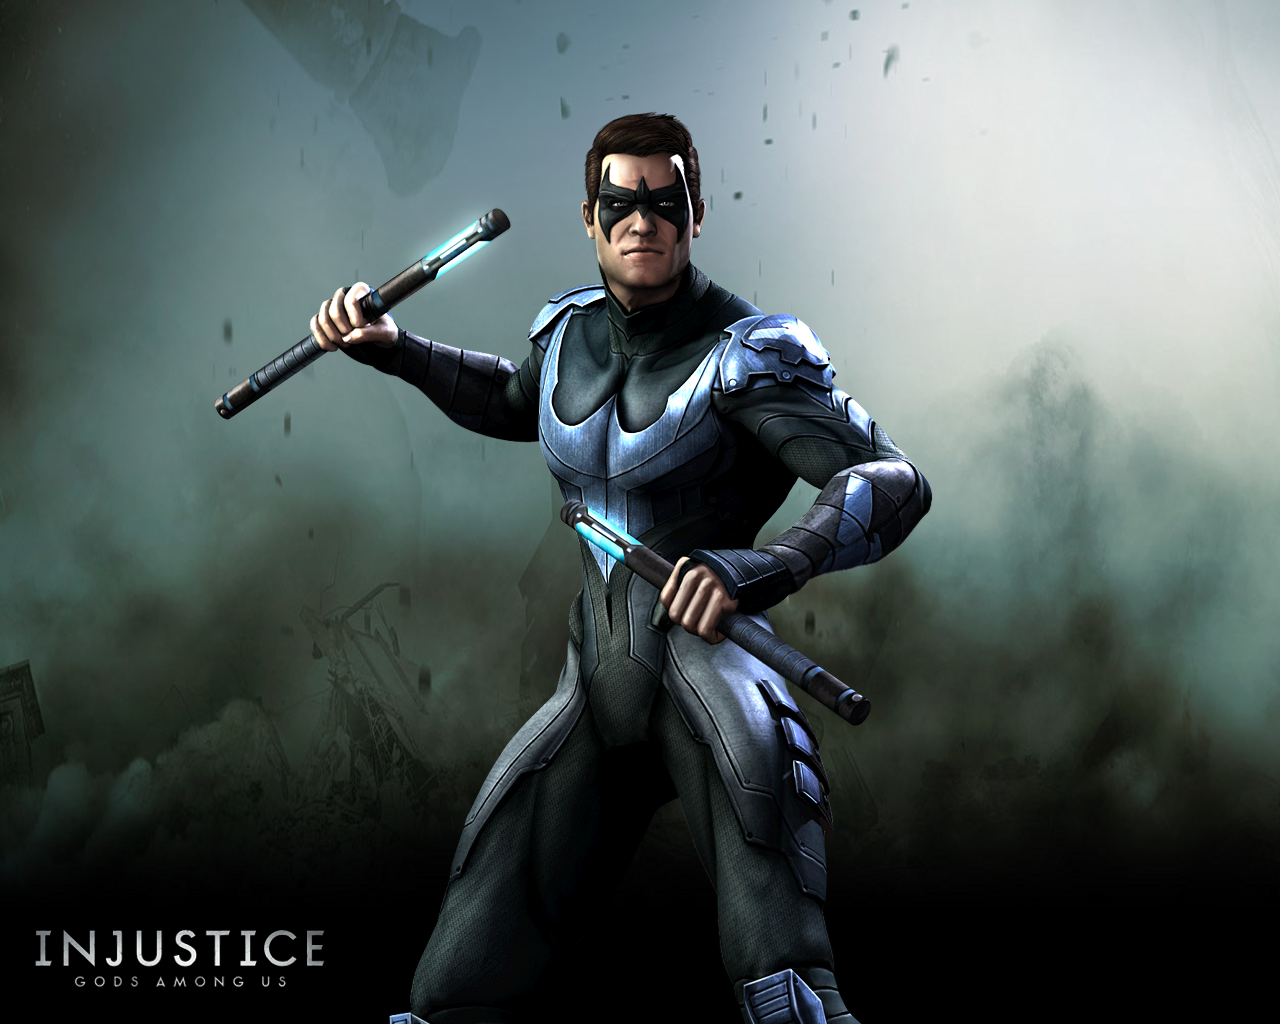 Game Art X Injustice  Gods  Among  Us  Wallpapers  2 